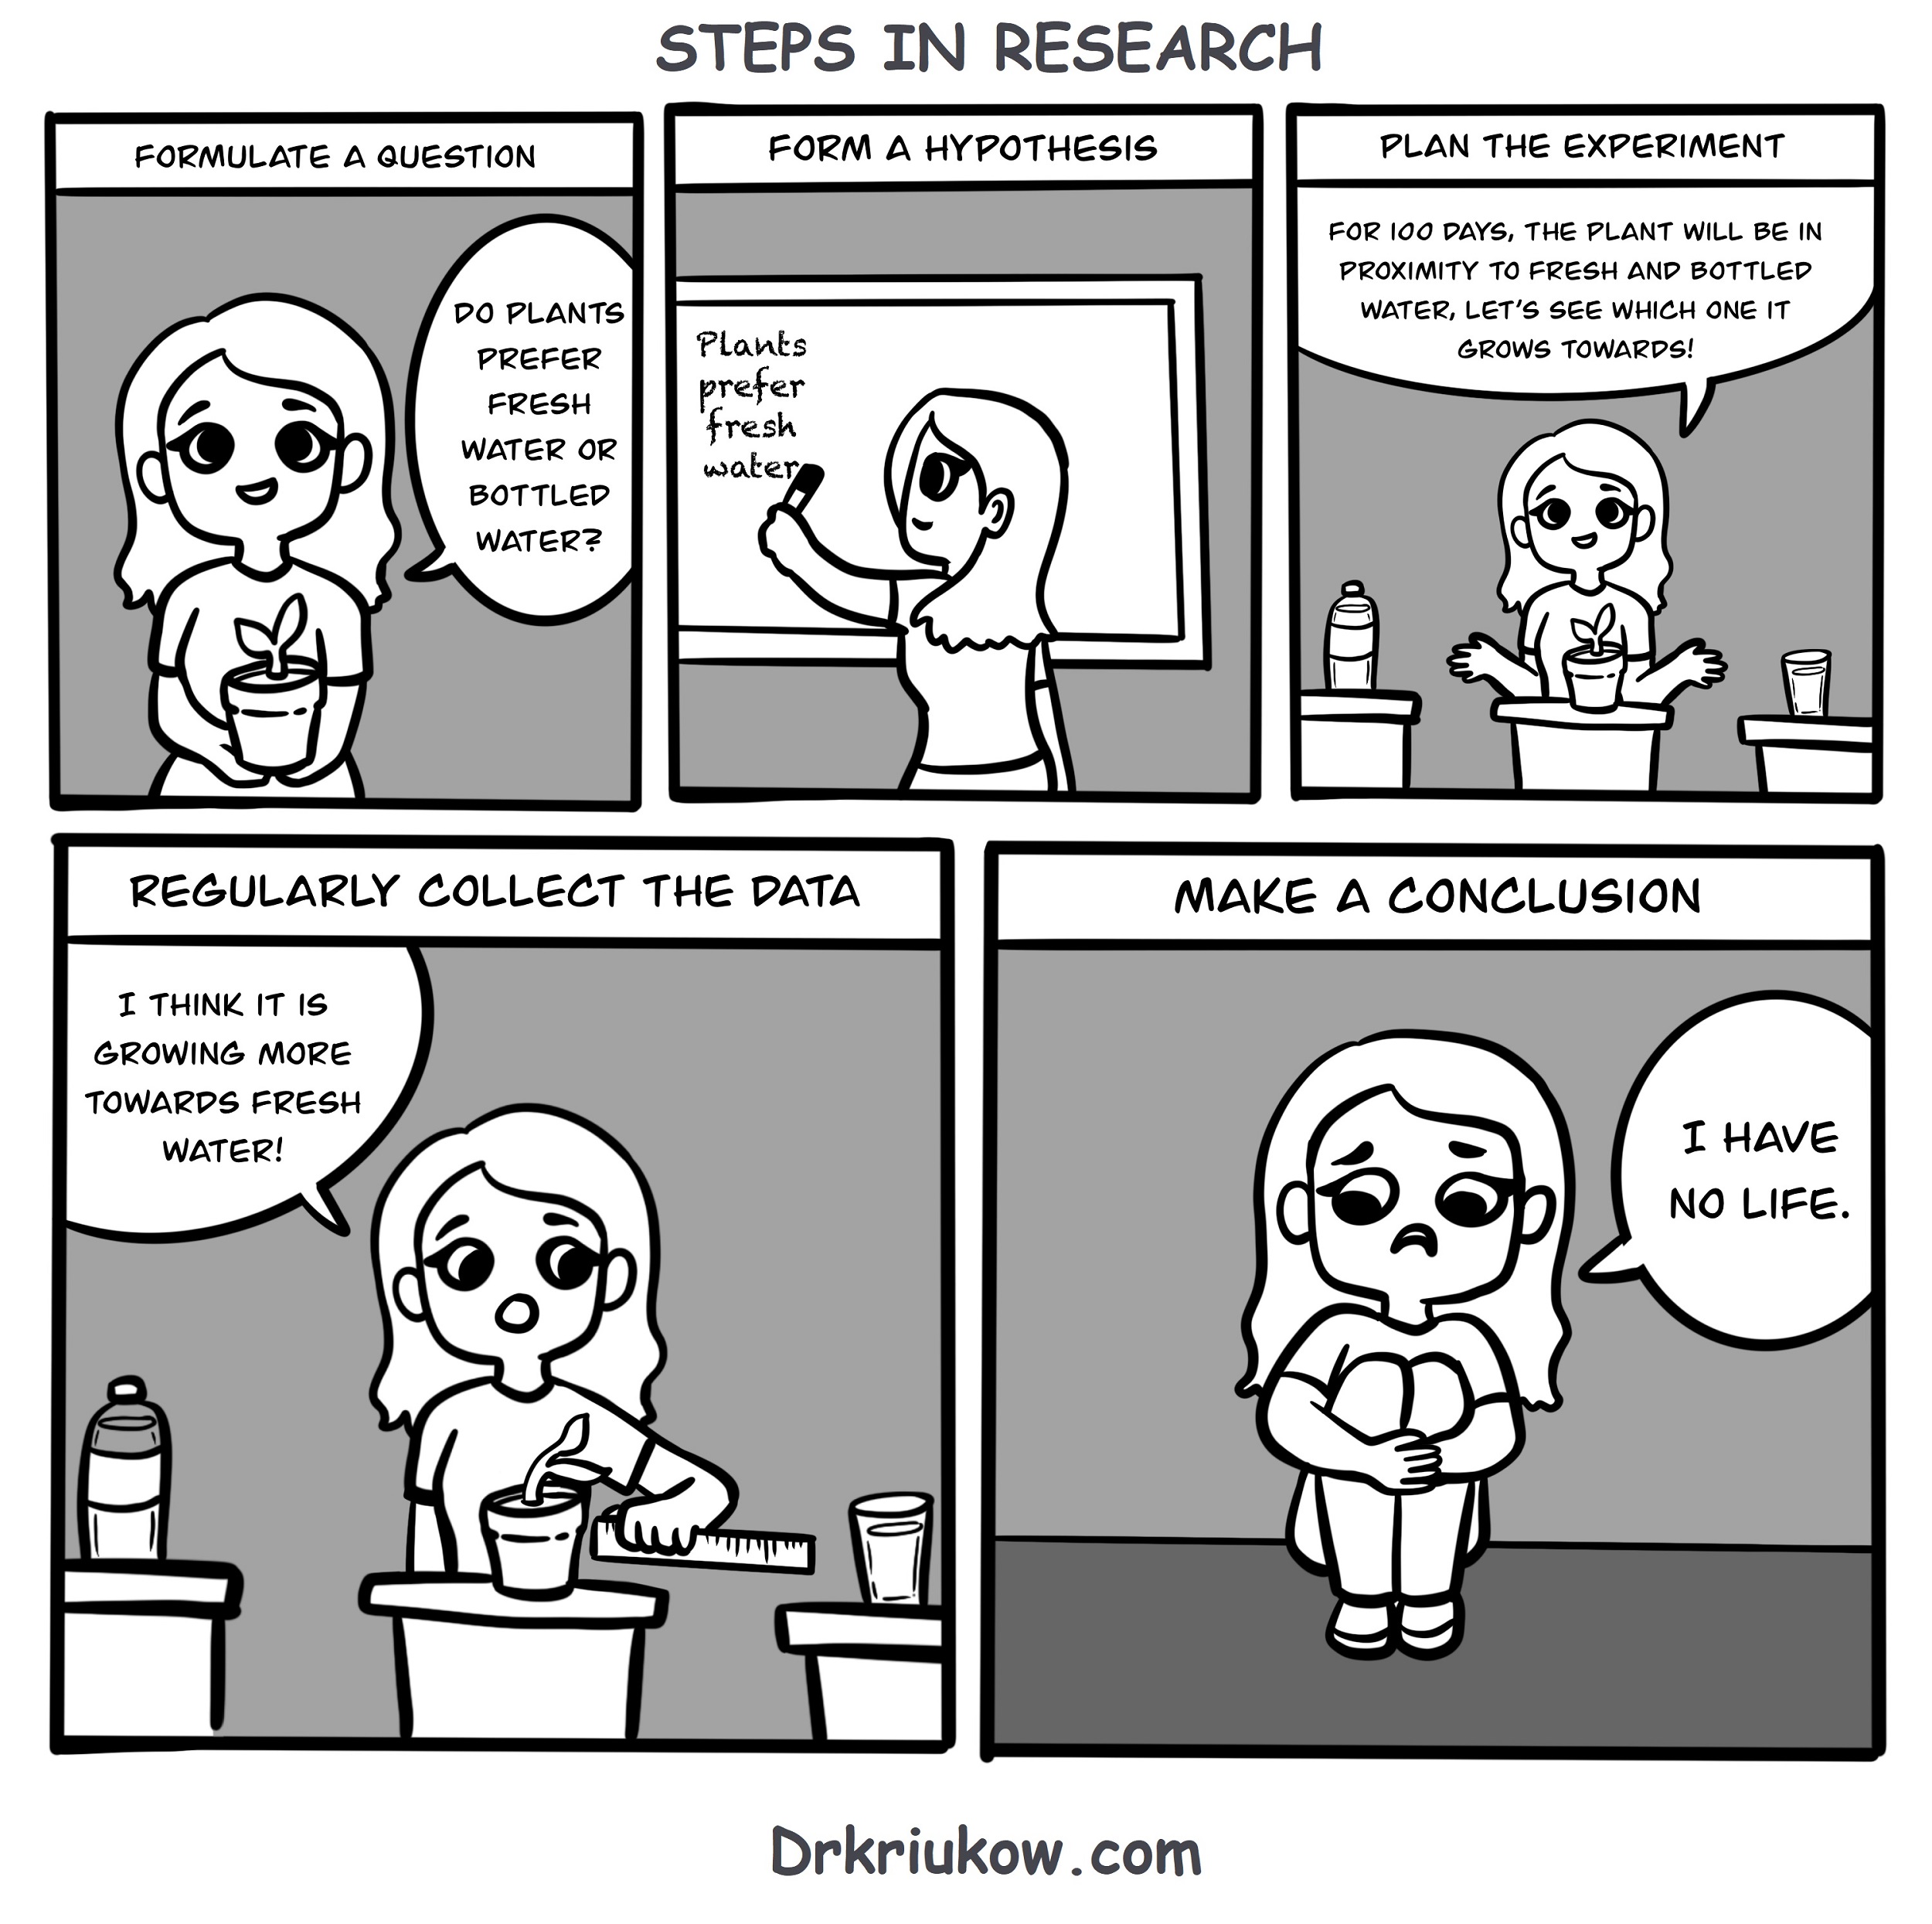 Steps in research (Comic)